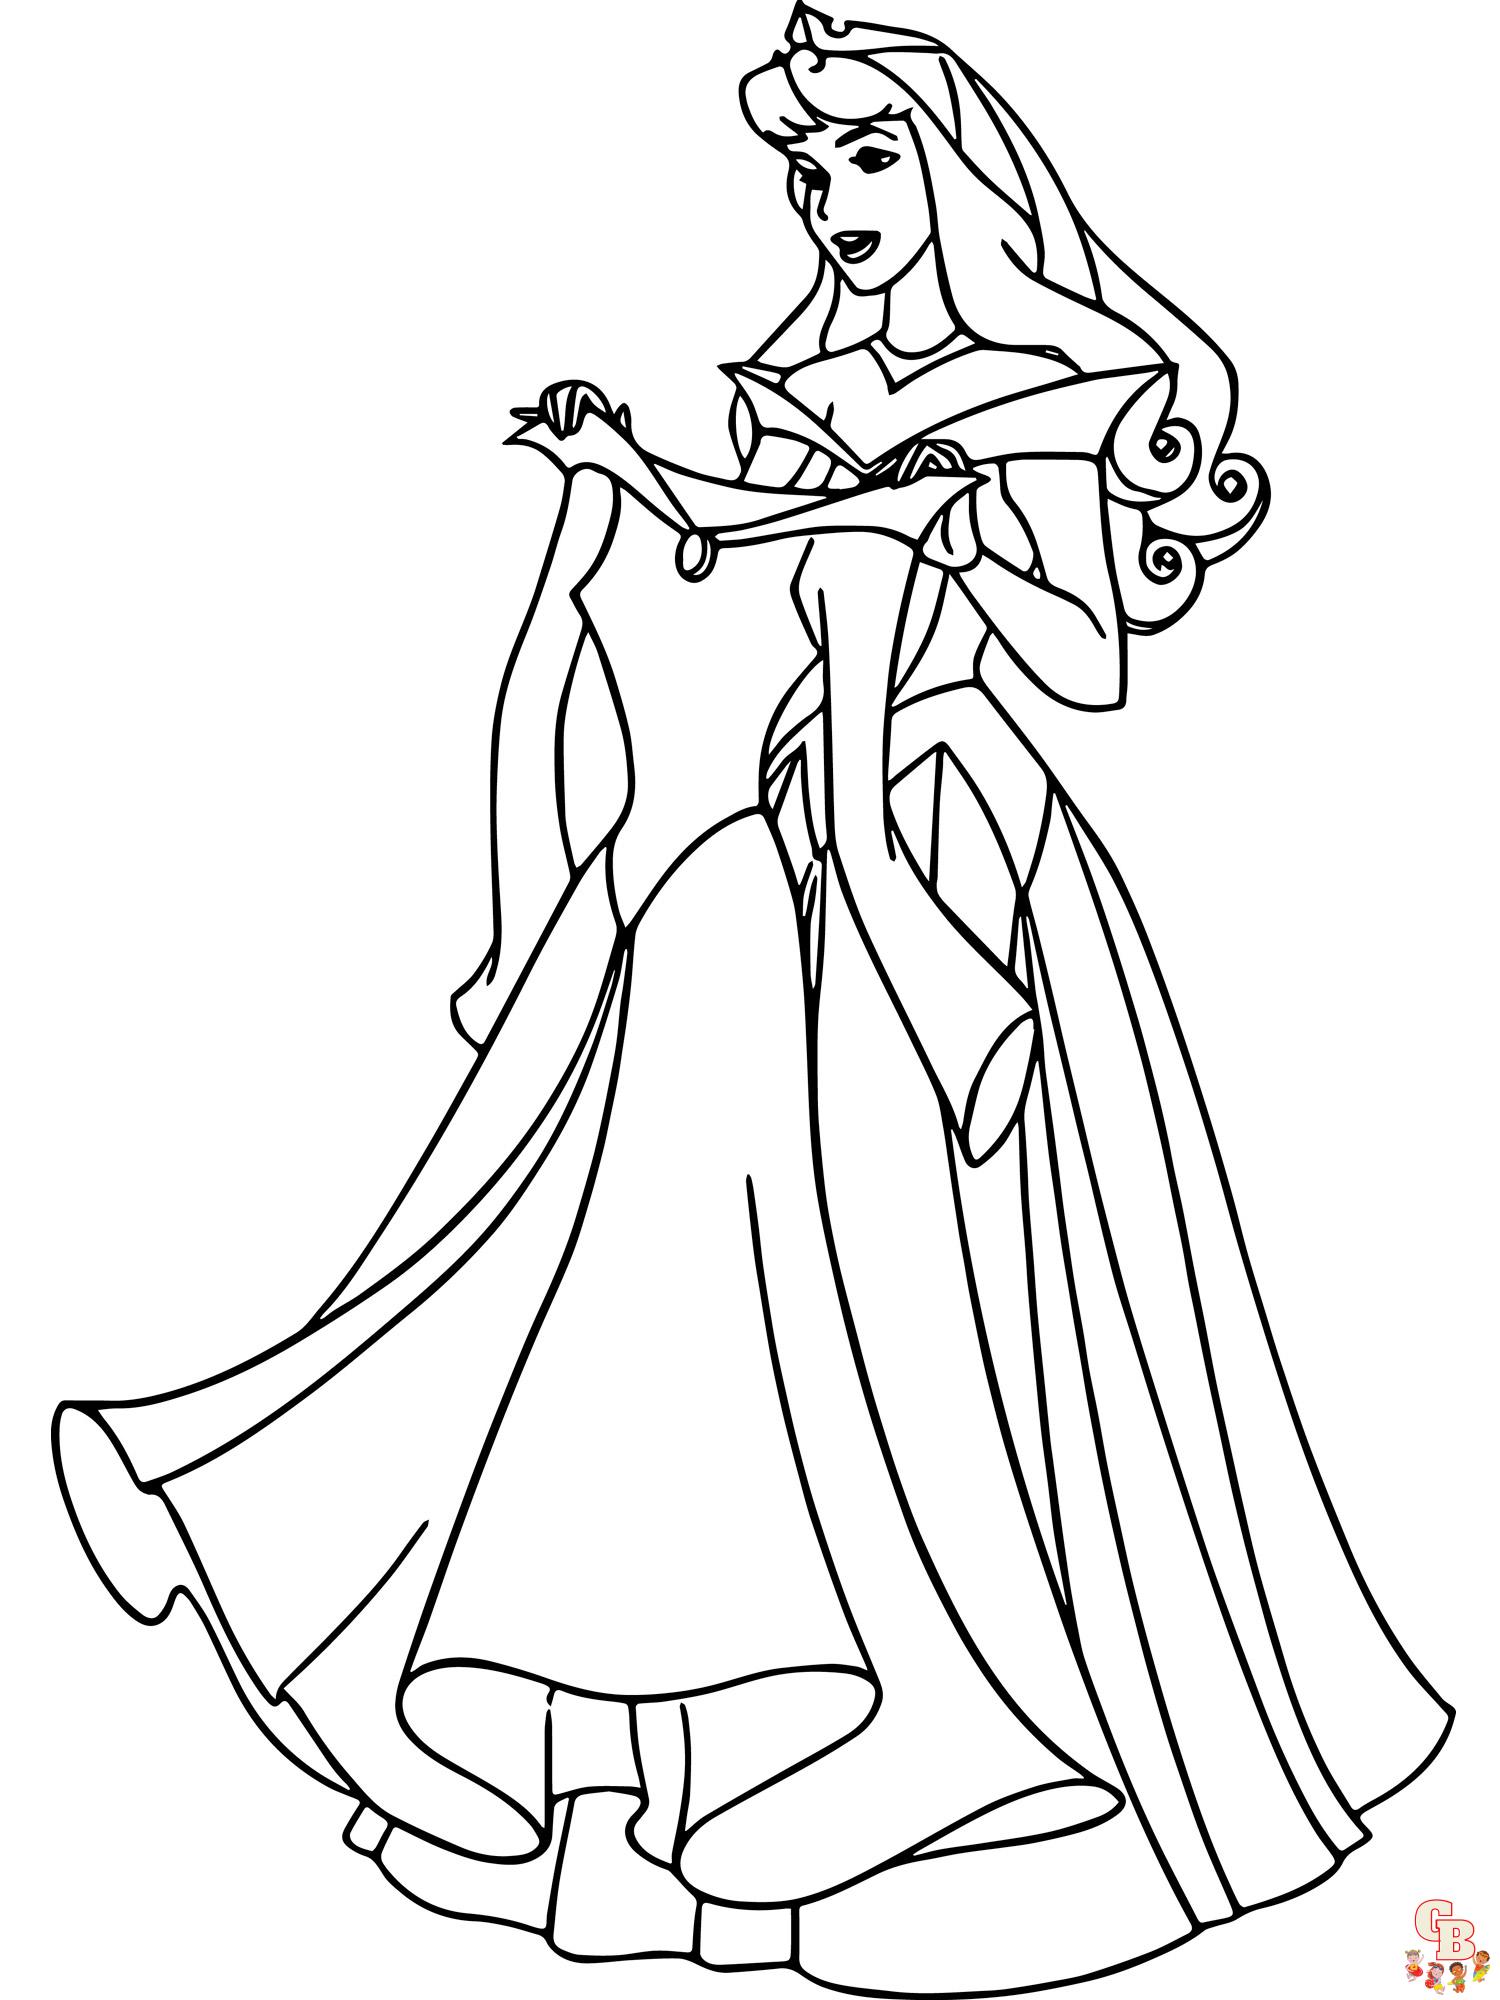 Aurora Coloring Pages 45